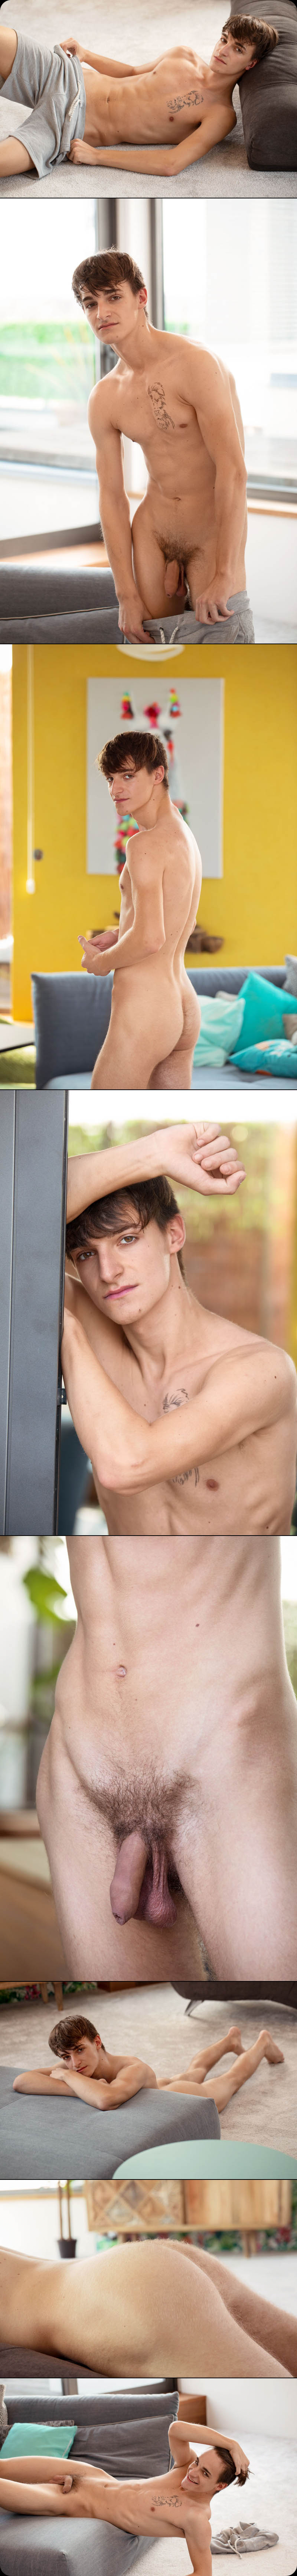 Miles Murray [Model of the Week] at BelAmiOnline